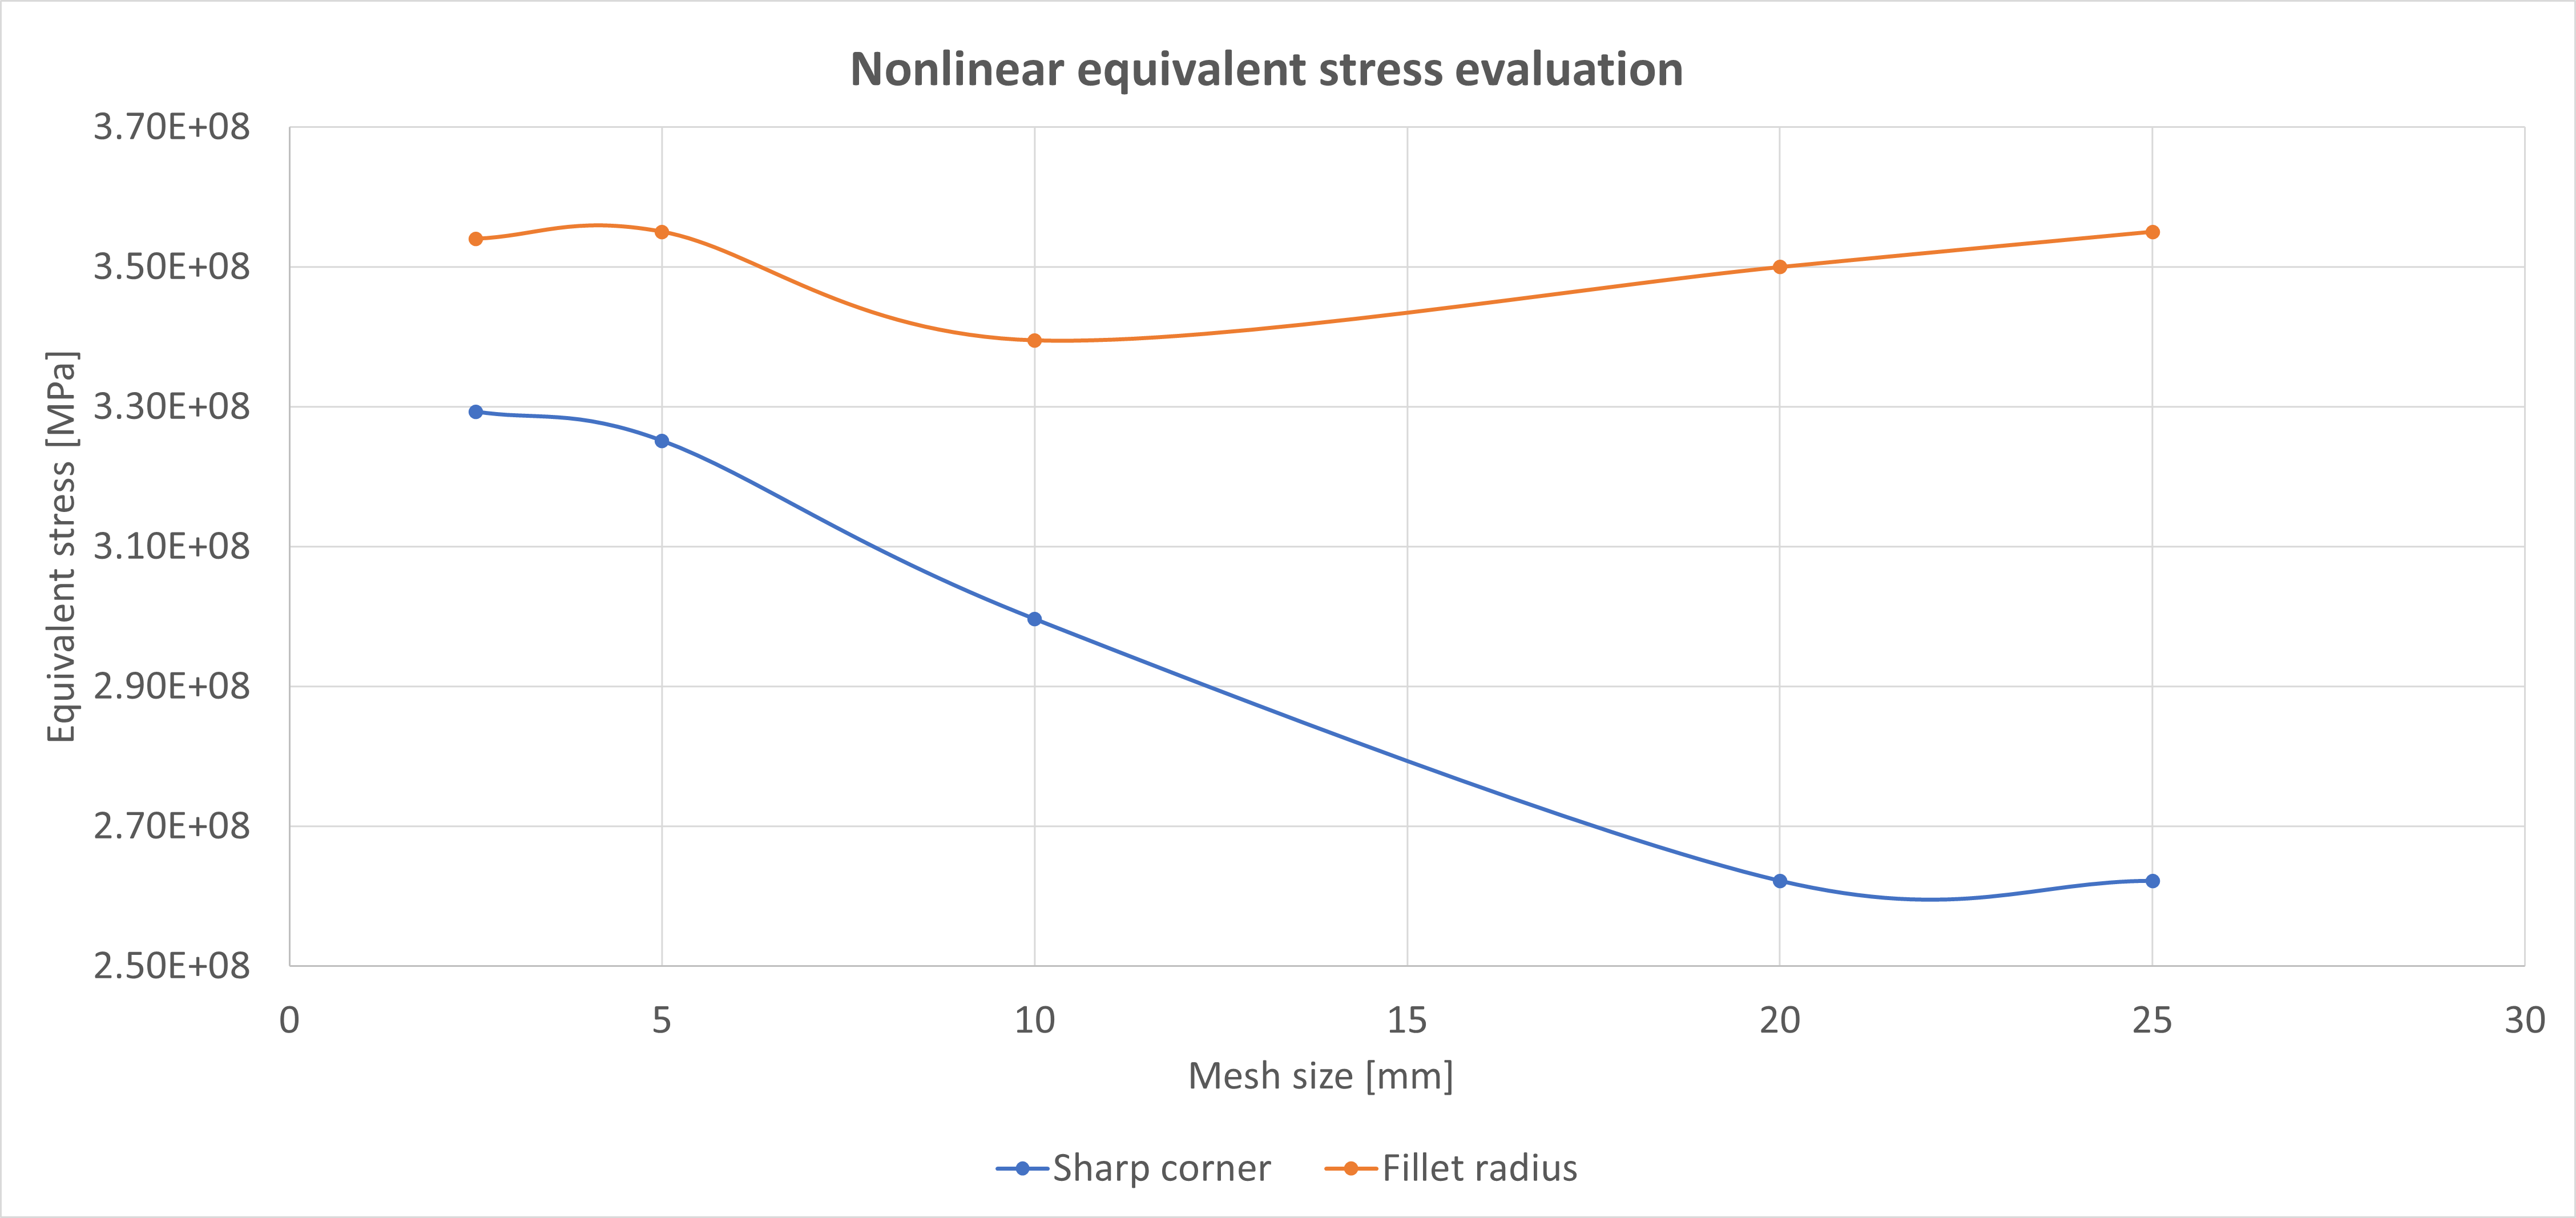 Relationship between mesh size and sharp and fillet corner equivalent stress